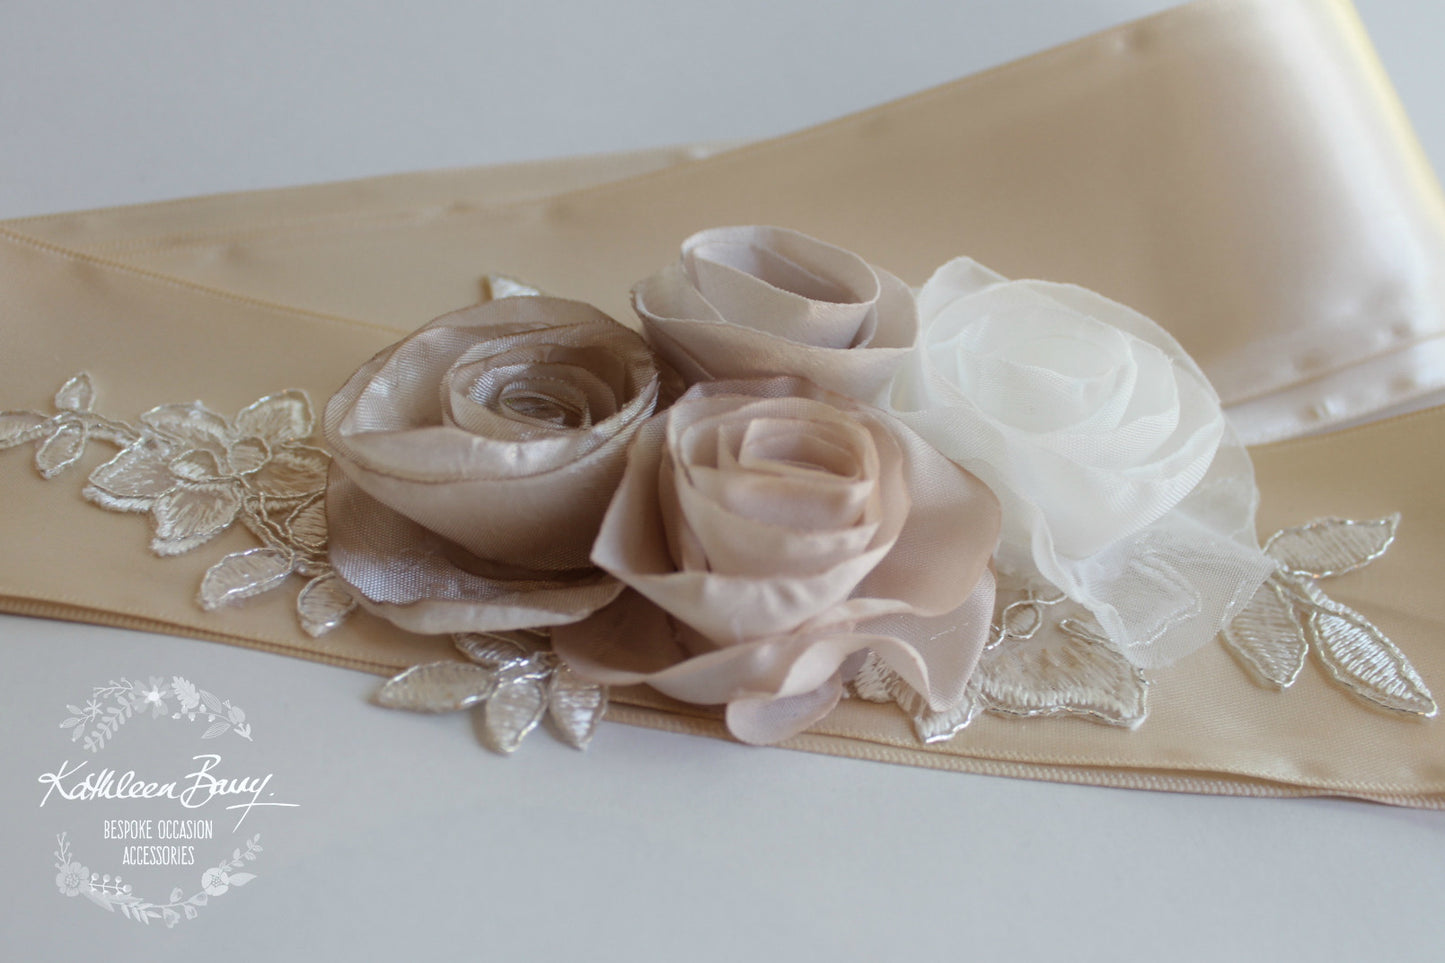 Lucille Wedding dress sash belt - floral roses with metallic corded lace - Champagne, Blush pink, taupe, nude